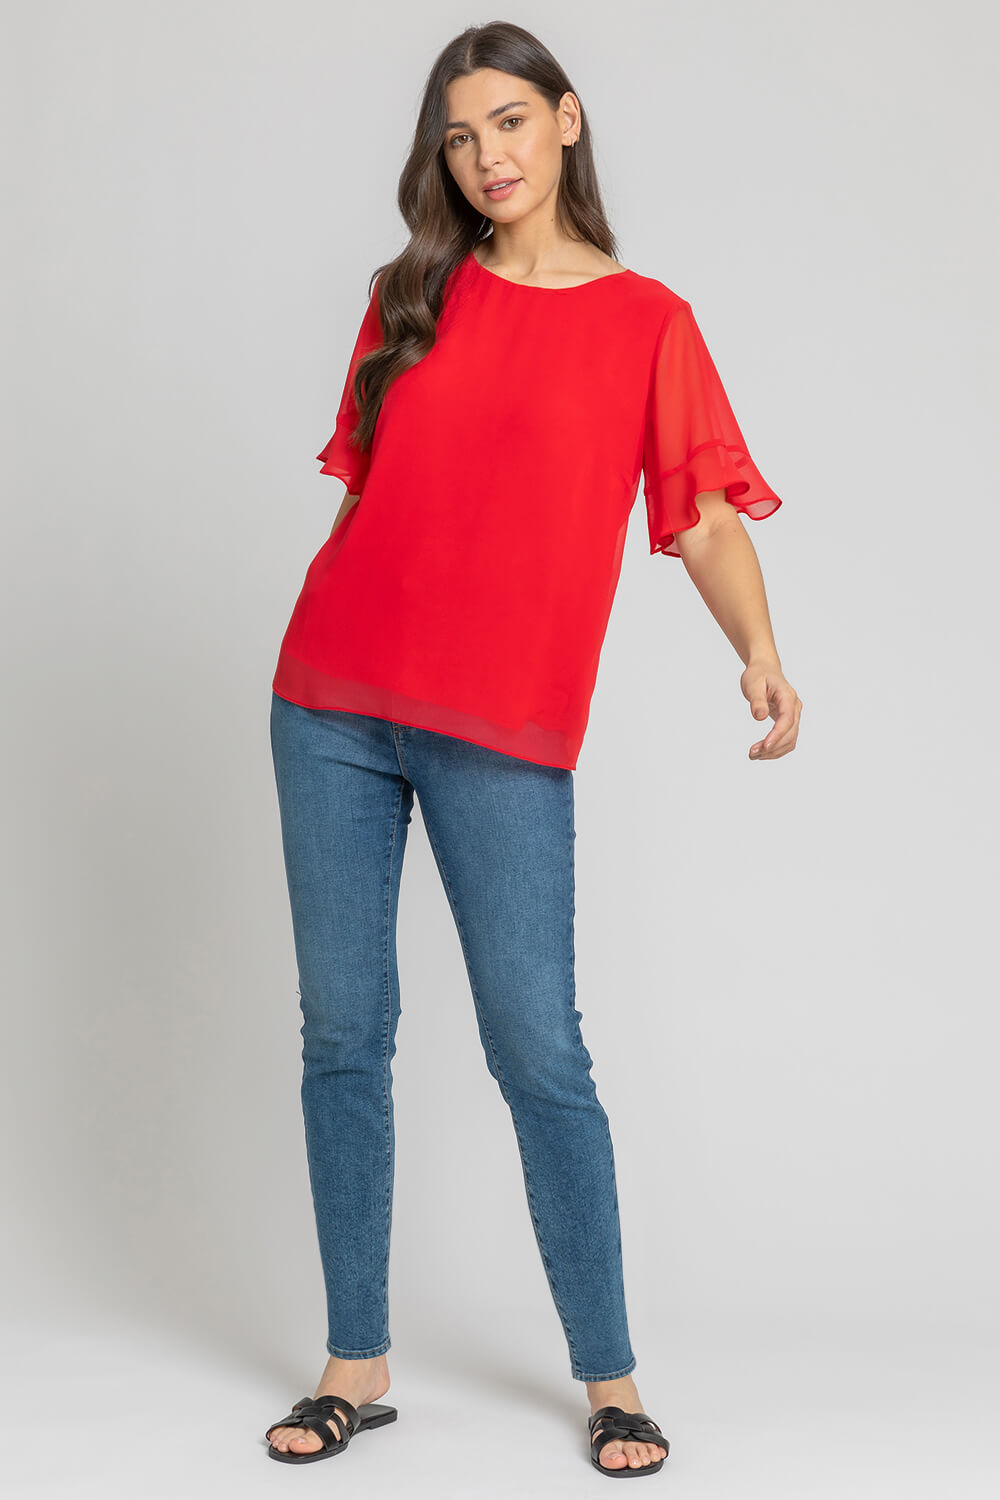 Red Plain Frill Detail Chiffon Top, Image 3 of 4